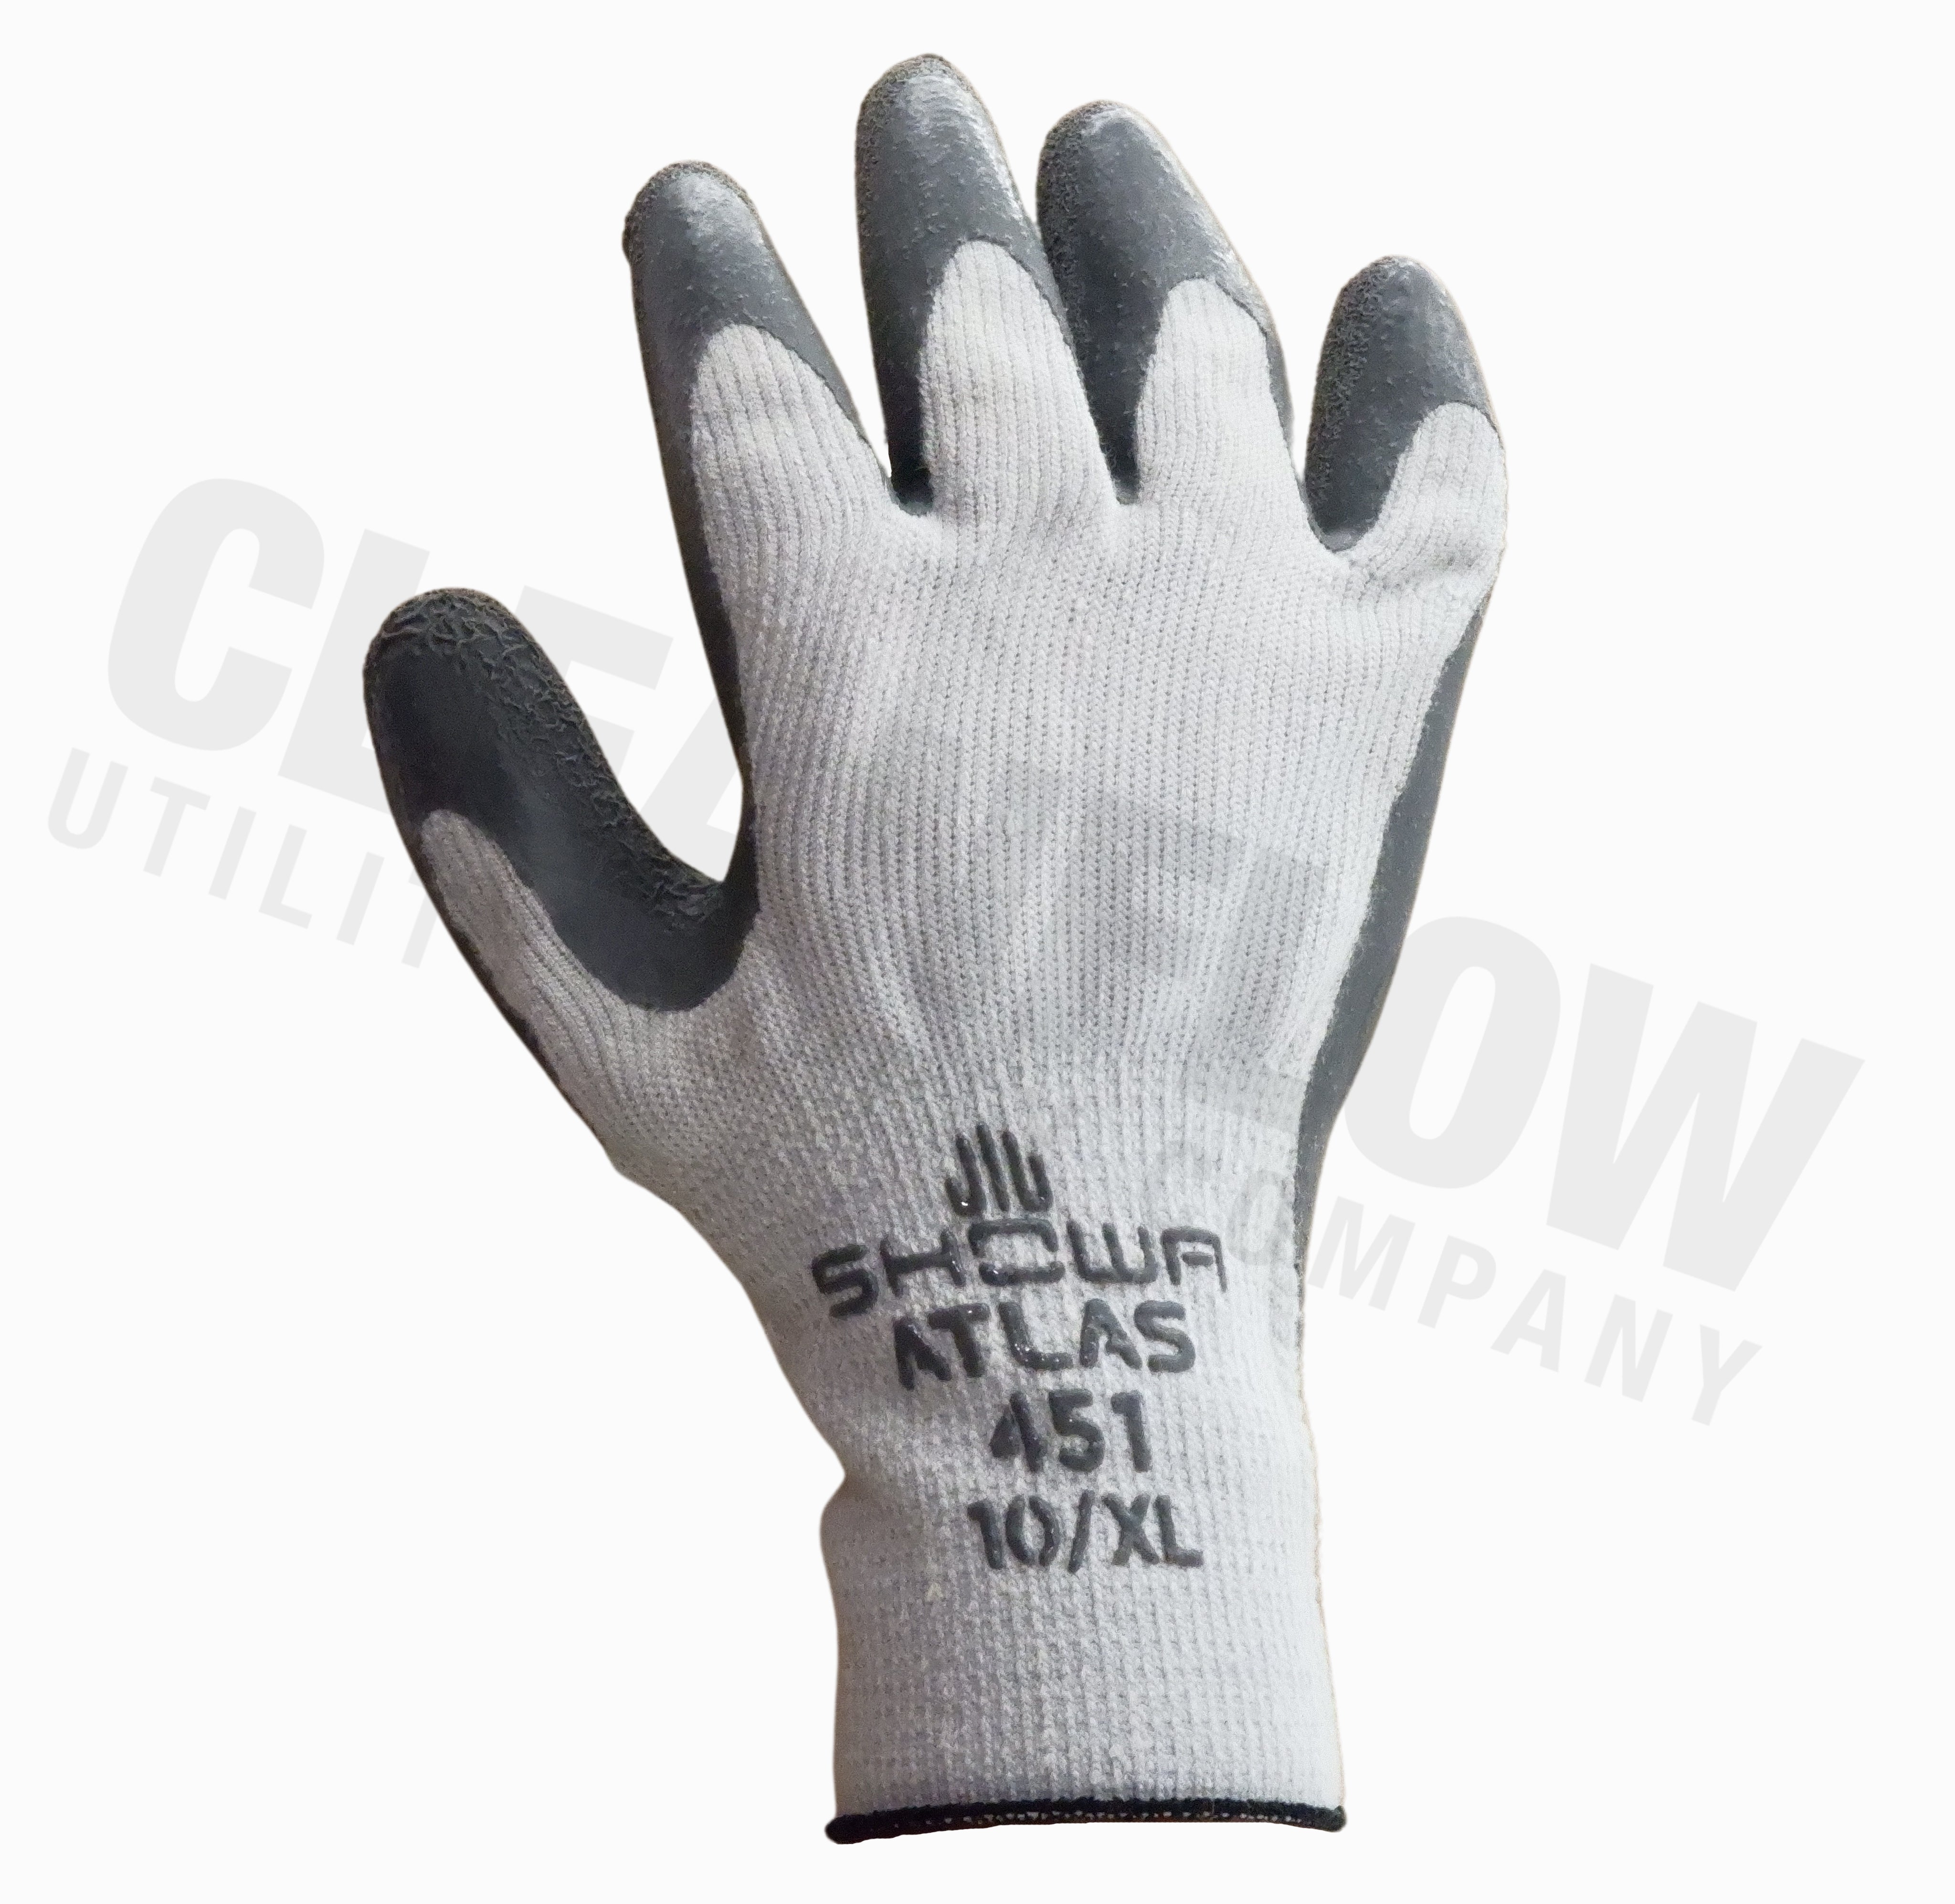 SHOWA Atlas 451 Thermal Insulated Latex Coat Gloves - Pack of 12 Pairs